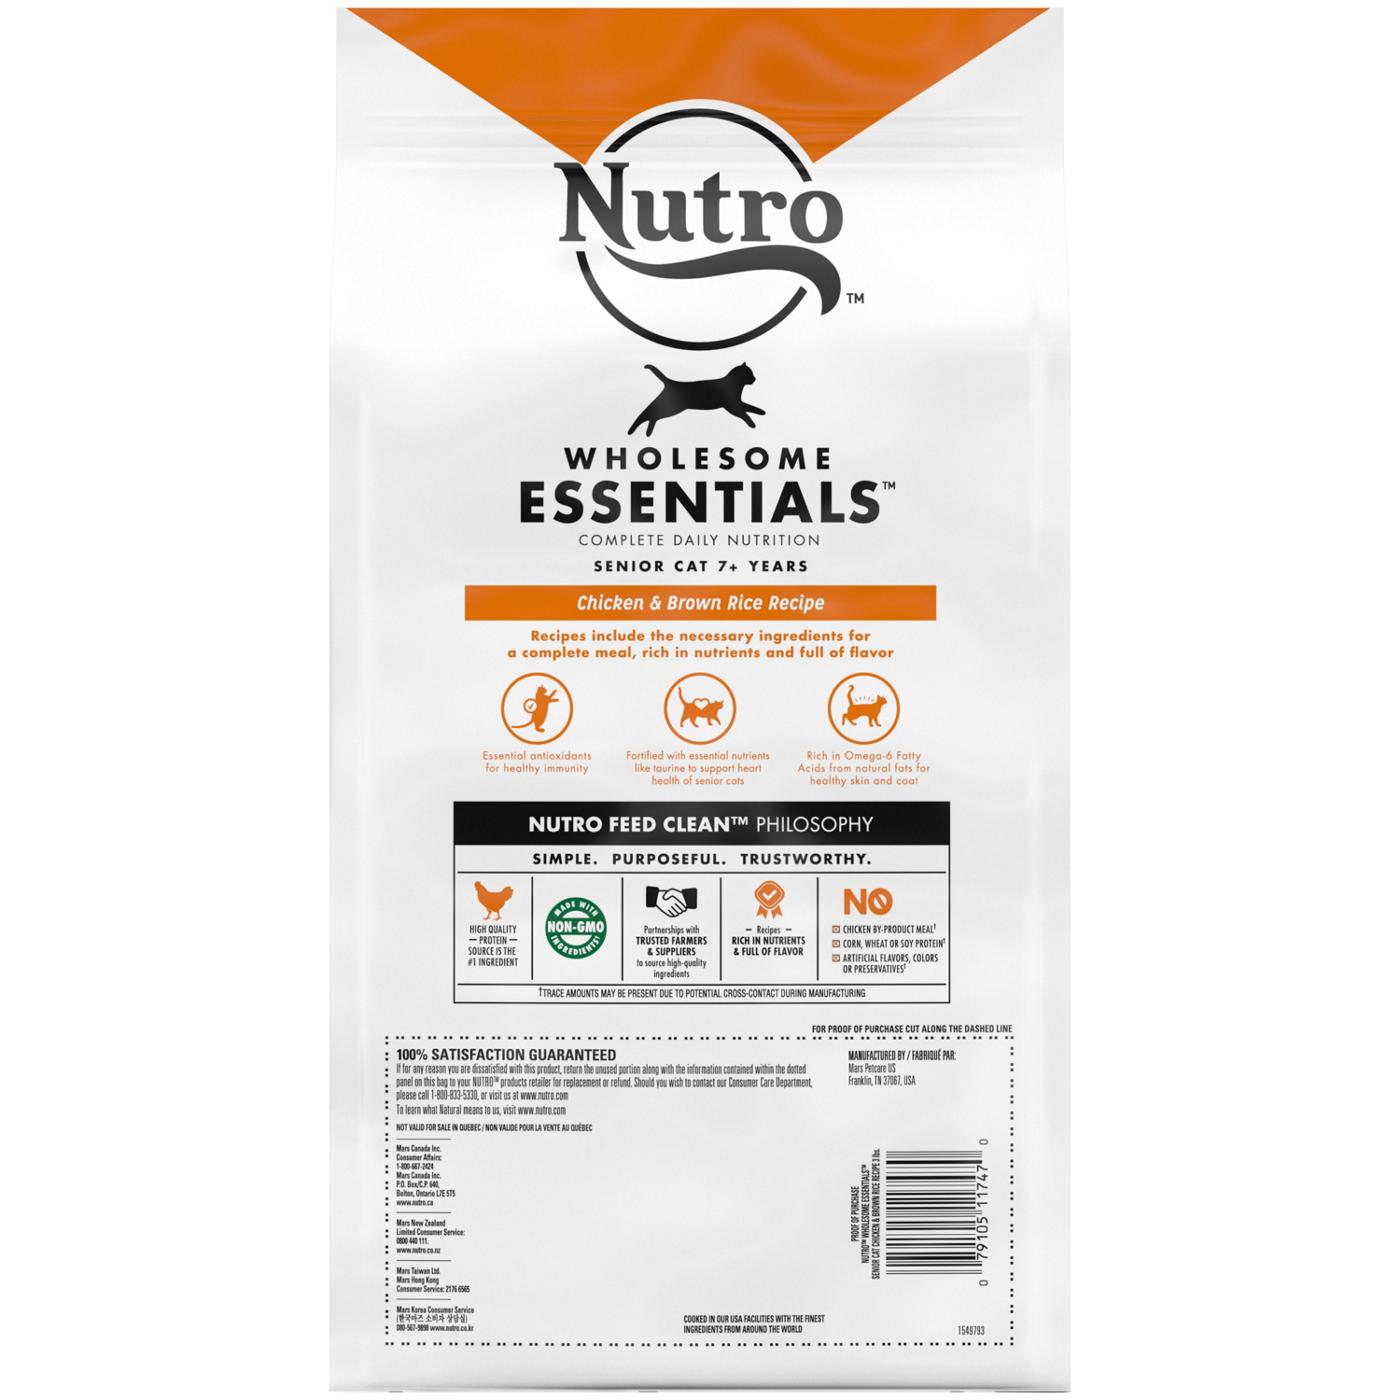 Nutro Wholesome Essentials Chicken & Brown Rice Dry Senior Cat Food; image 4 of 4